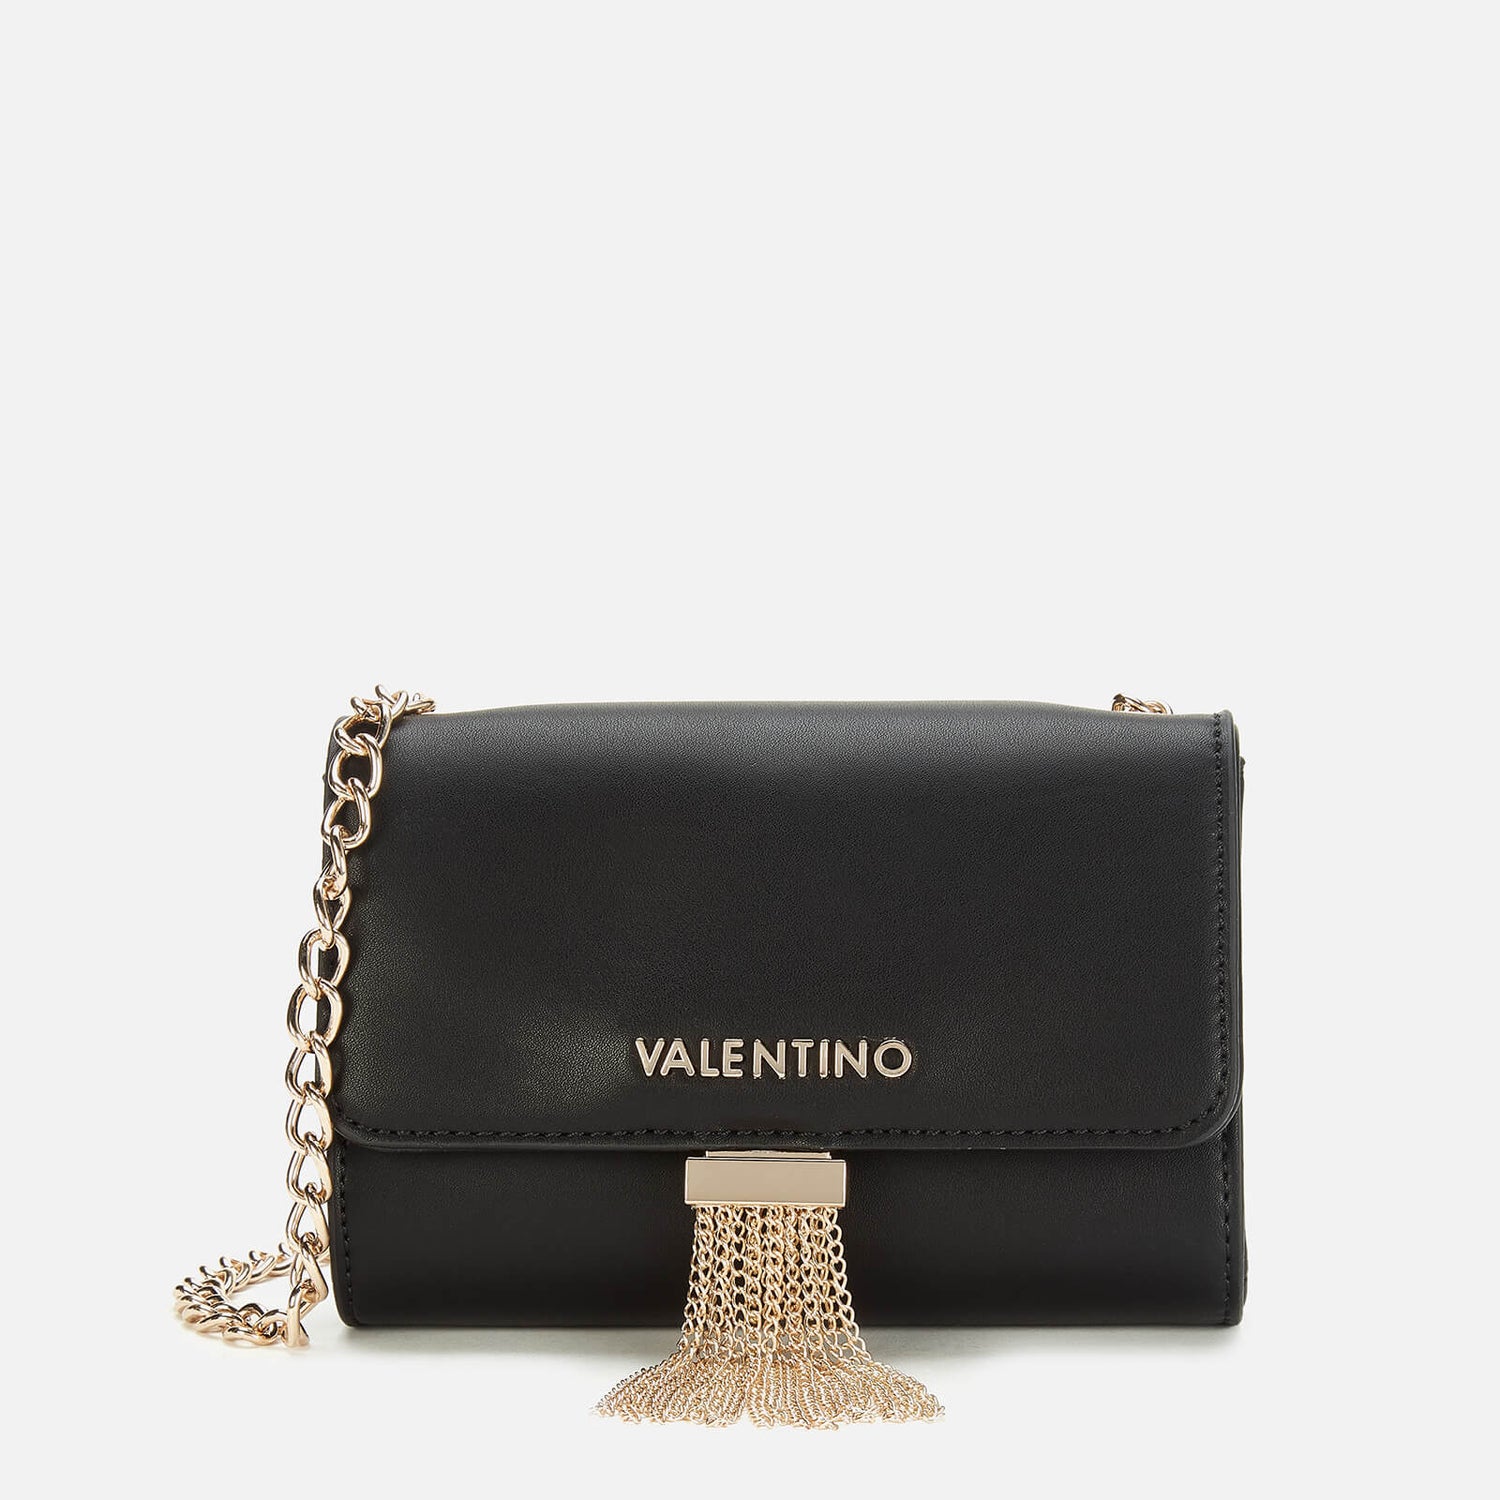 Valentino Women's Piccadilly Small Shoulder Bag - Black